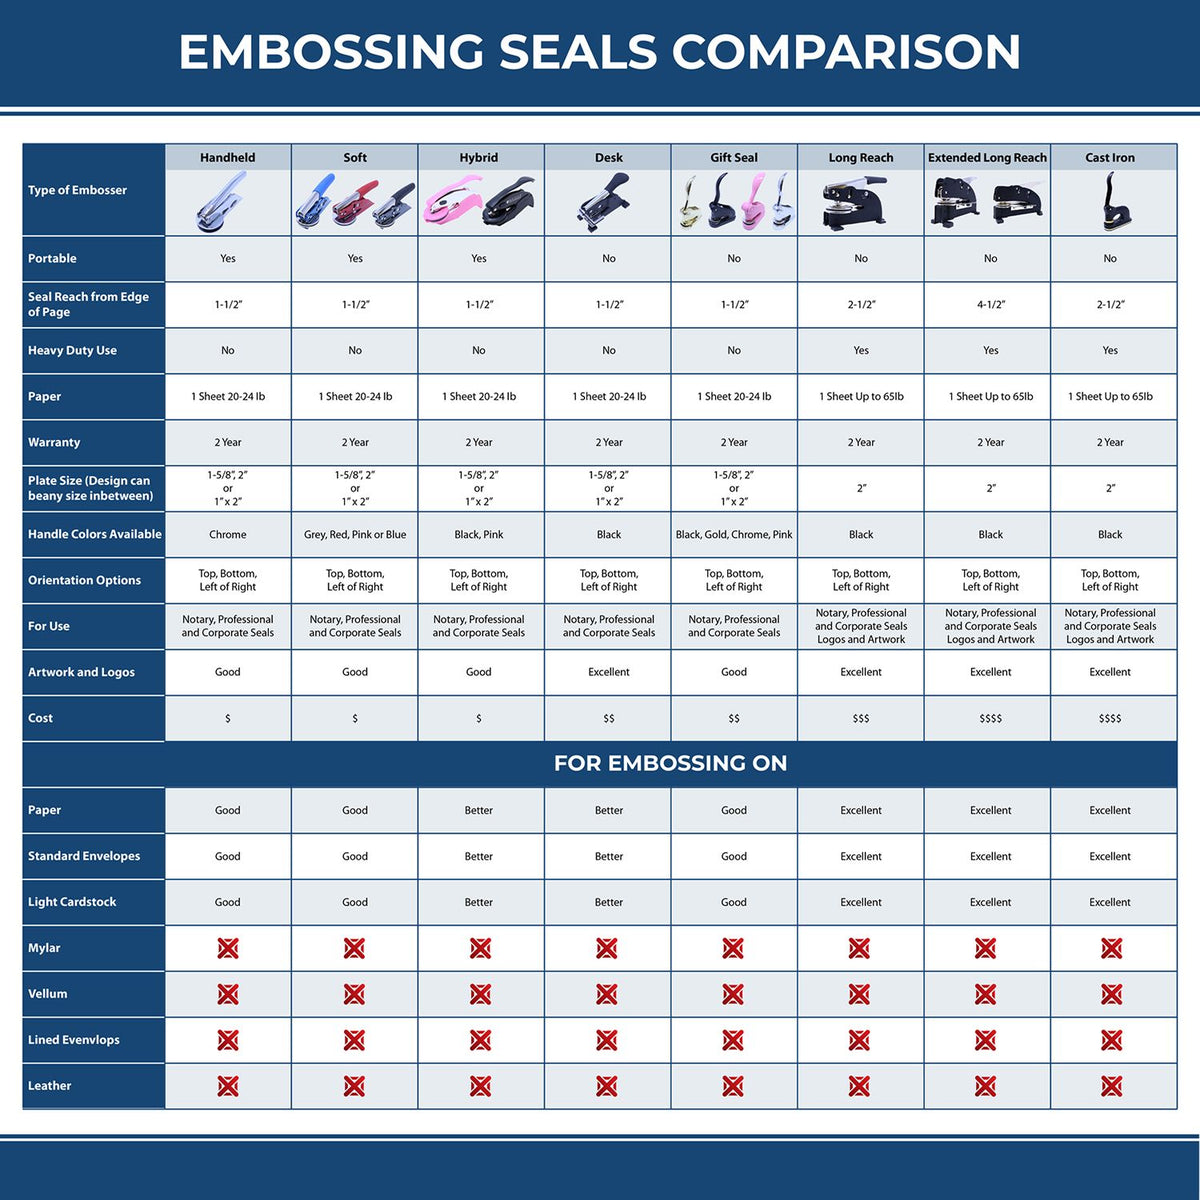 A comparison chart for the different types of mount models available for the Soft Nebraska Professional Geologist Seal